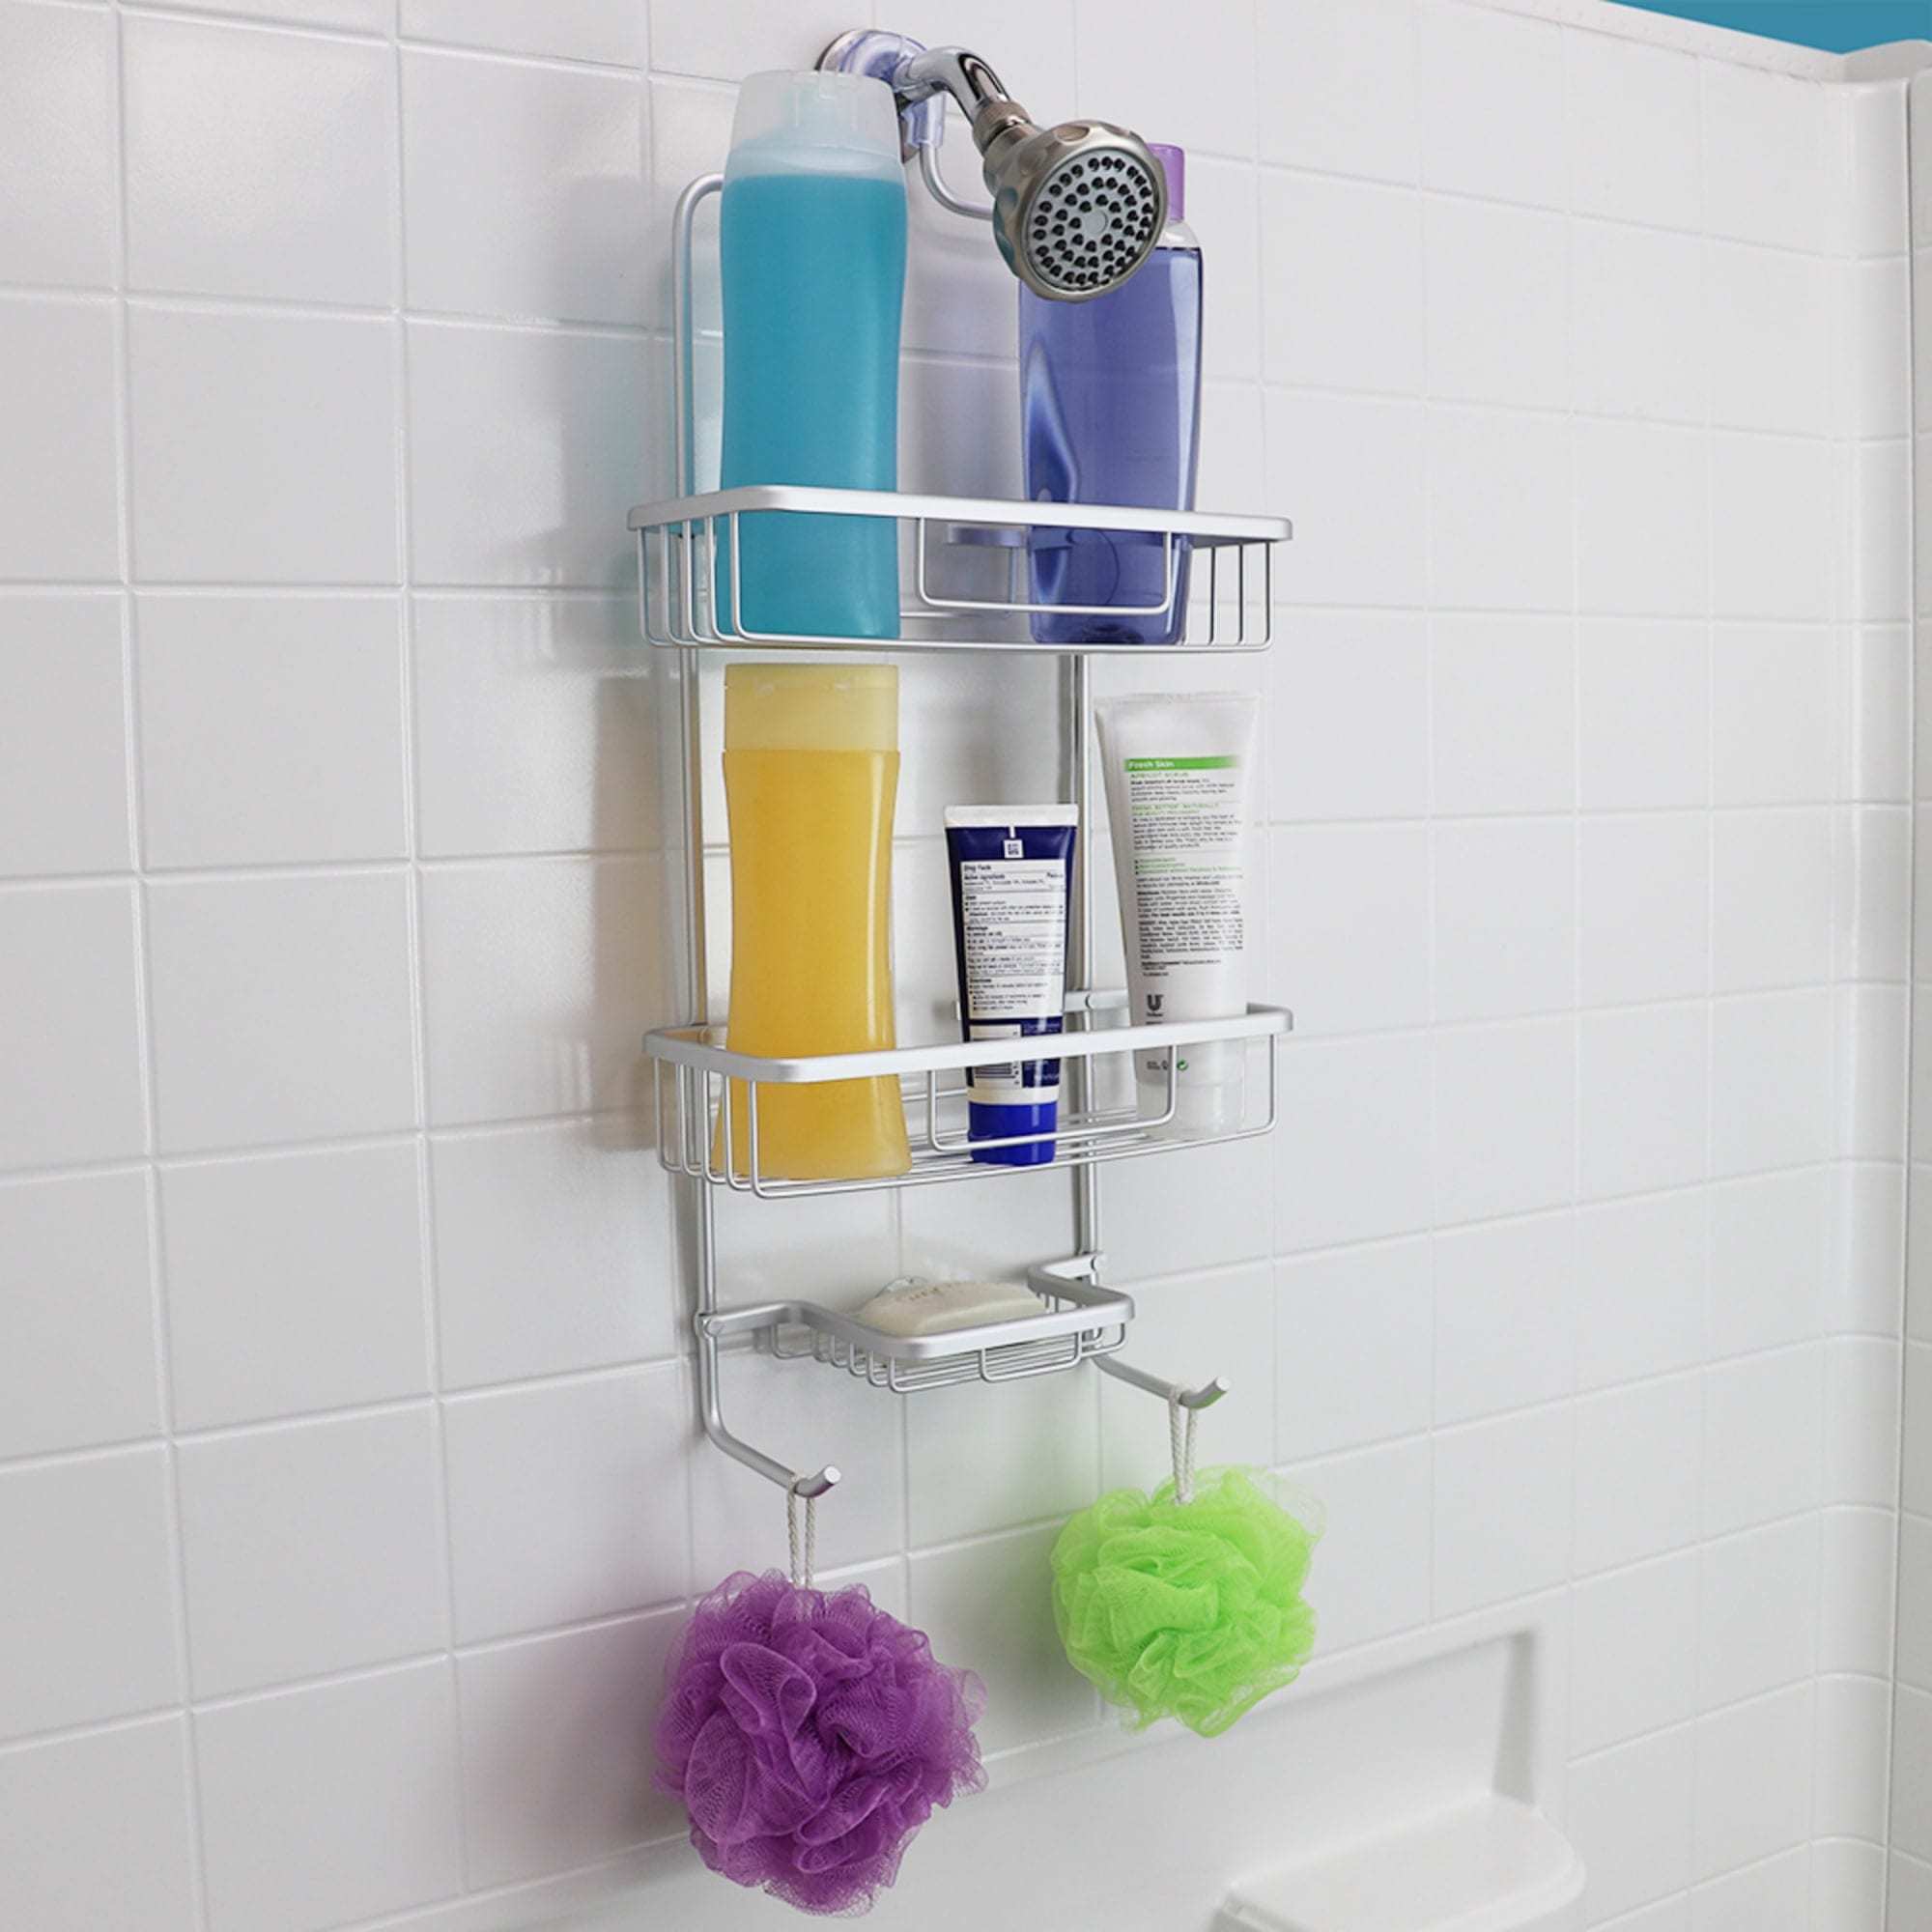 Home Basics 2 Tier Aluminum Suction Shower Caddy with Extra Long Baskets with Integrated hooks and Soap Tray, Grey $15.00 EACH, CASE PACK OF 6